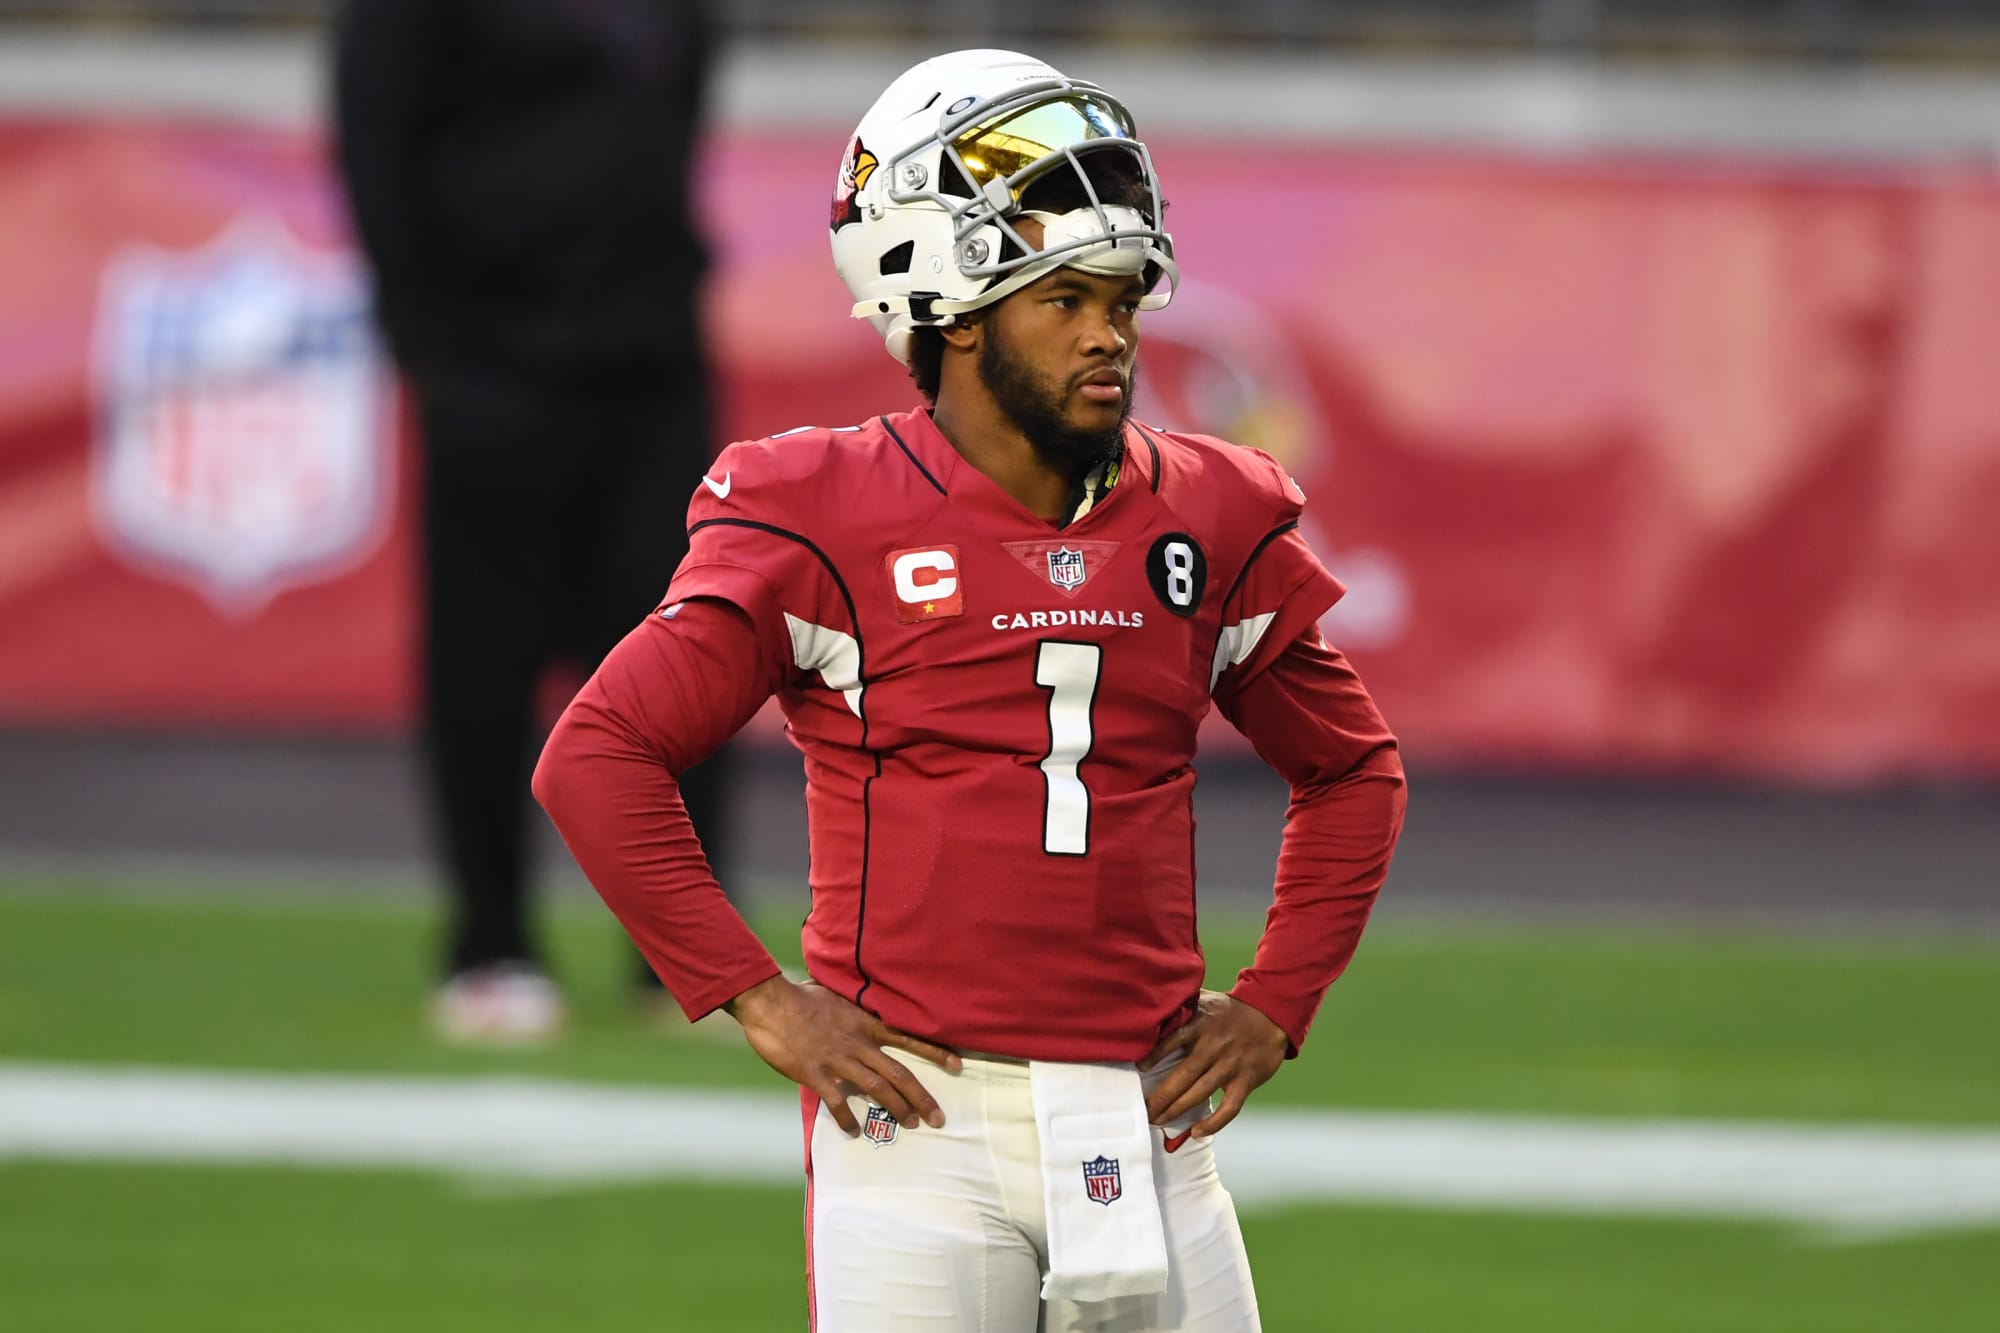 Cardinals QB Kyler Murray is ready to get back in the win column